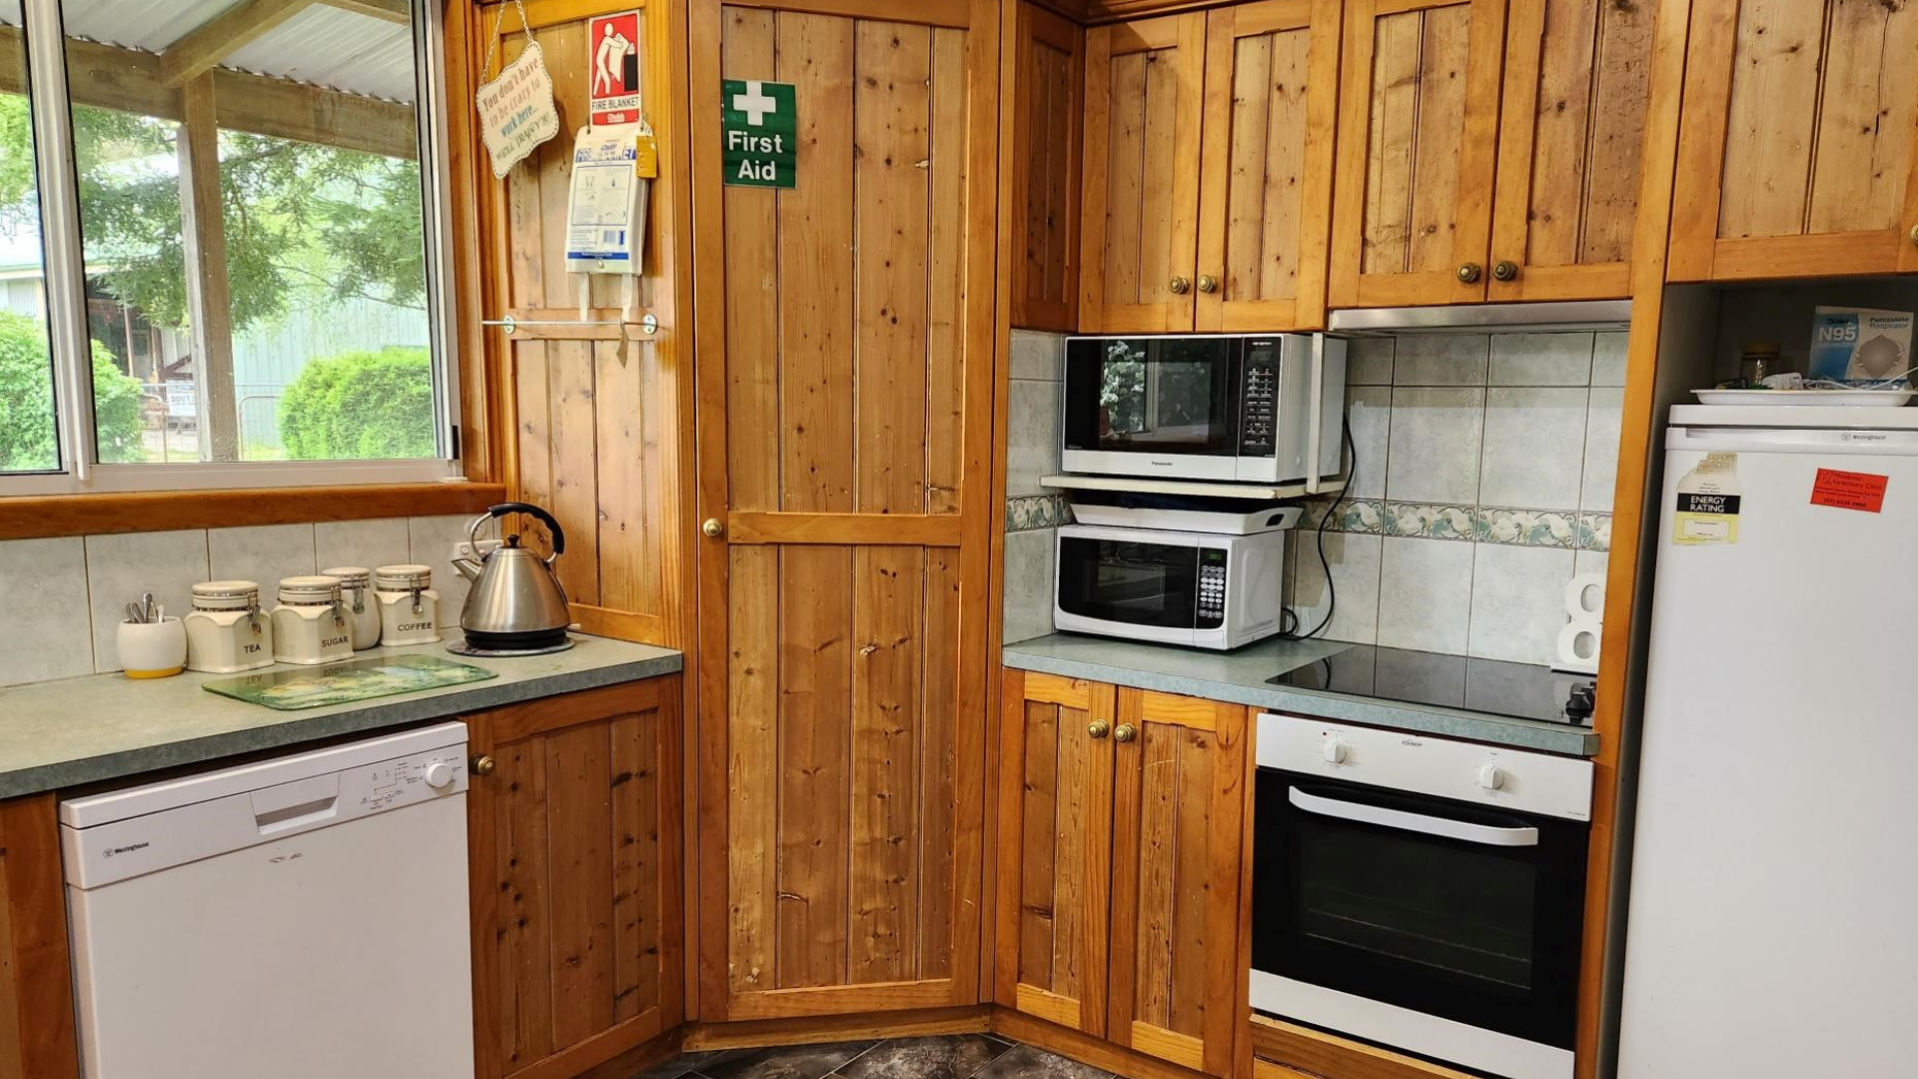 --Kitchen with wooden cupboards, a dishwasher, oven, stove and two microwaves.--